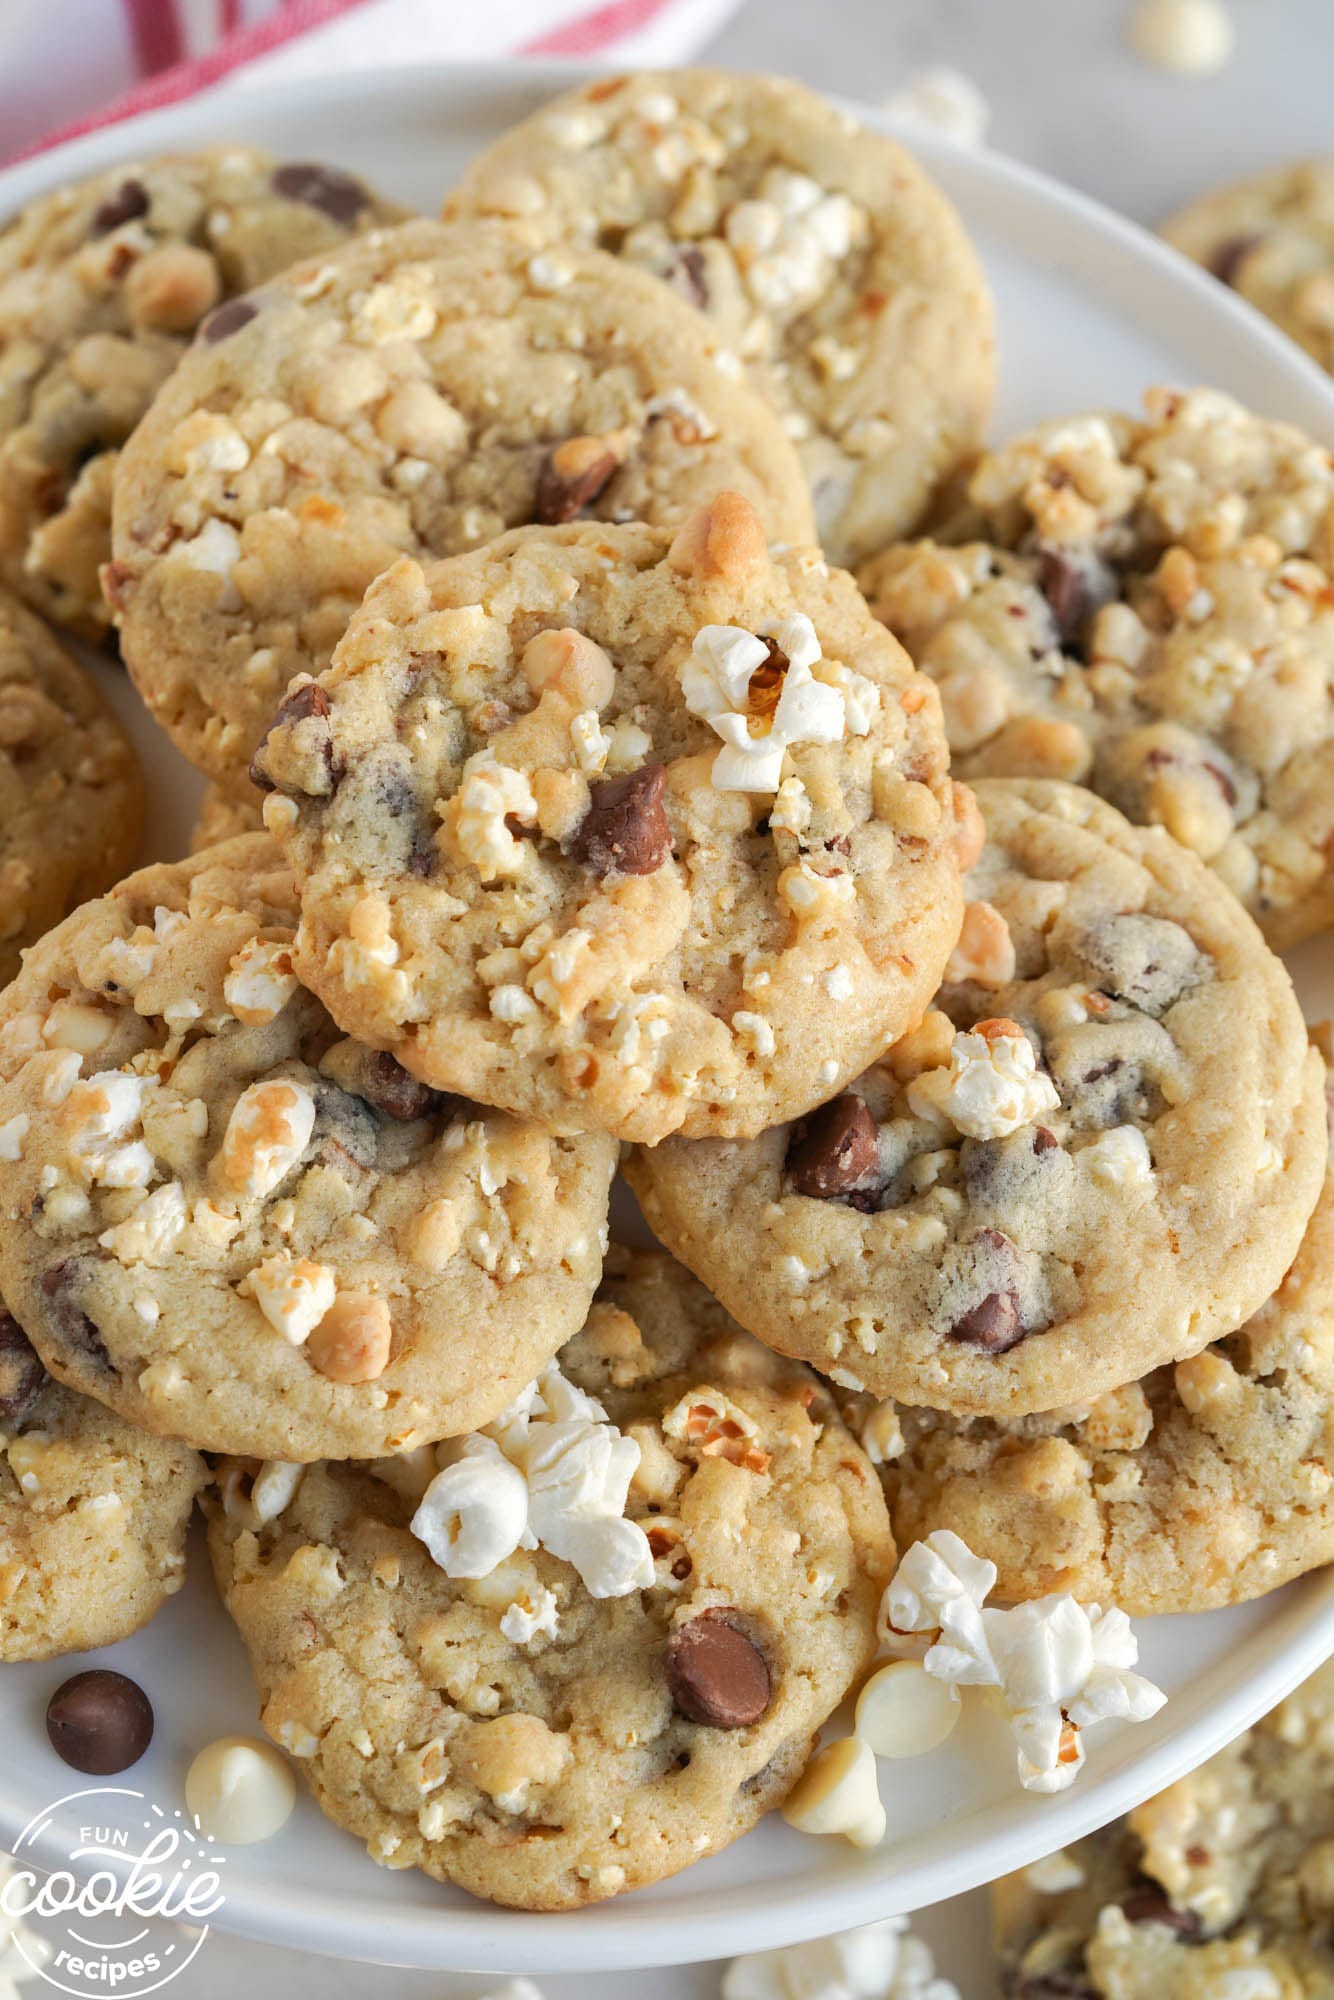 A platter filled with chocolate chip cookies with popcorn in them.